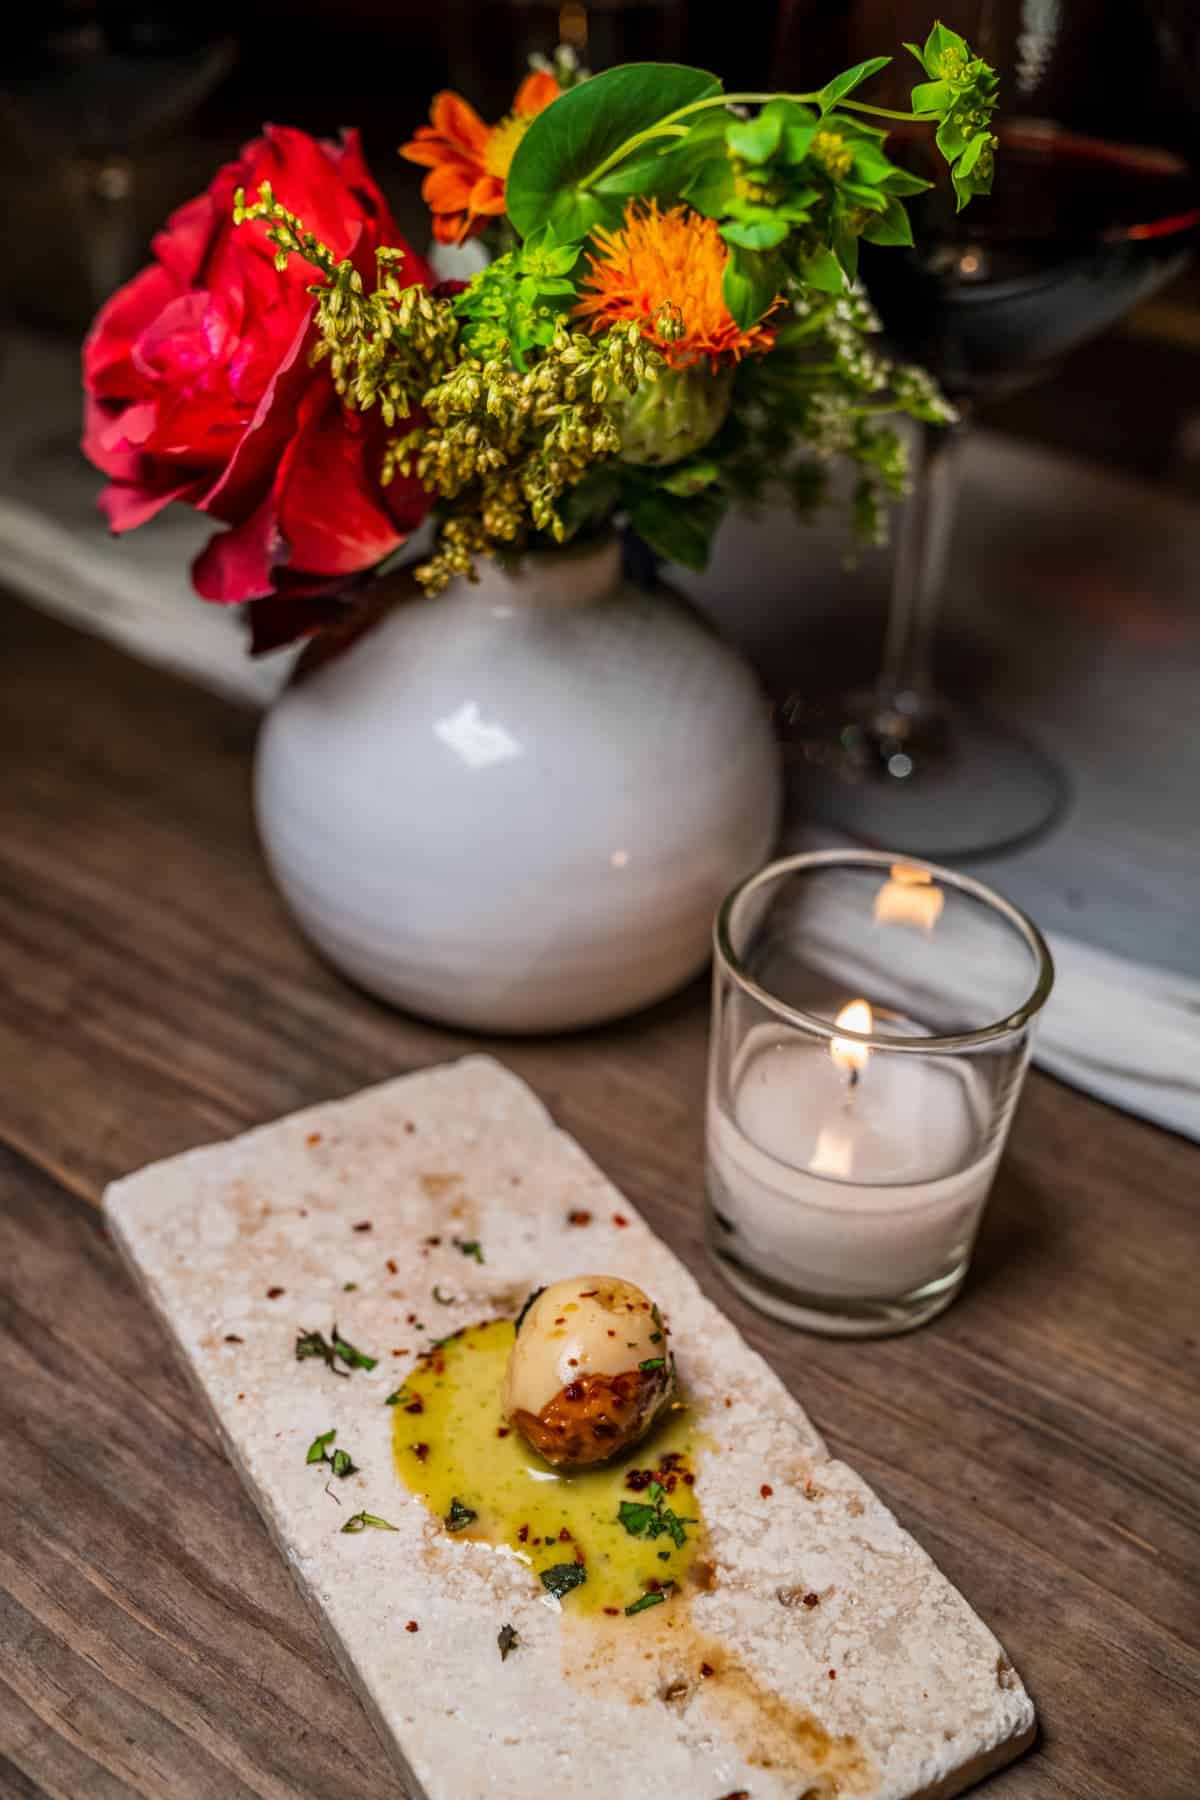 Quail egg on a platter flanked by vase of flowers and a lit candle